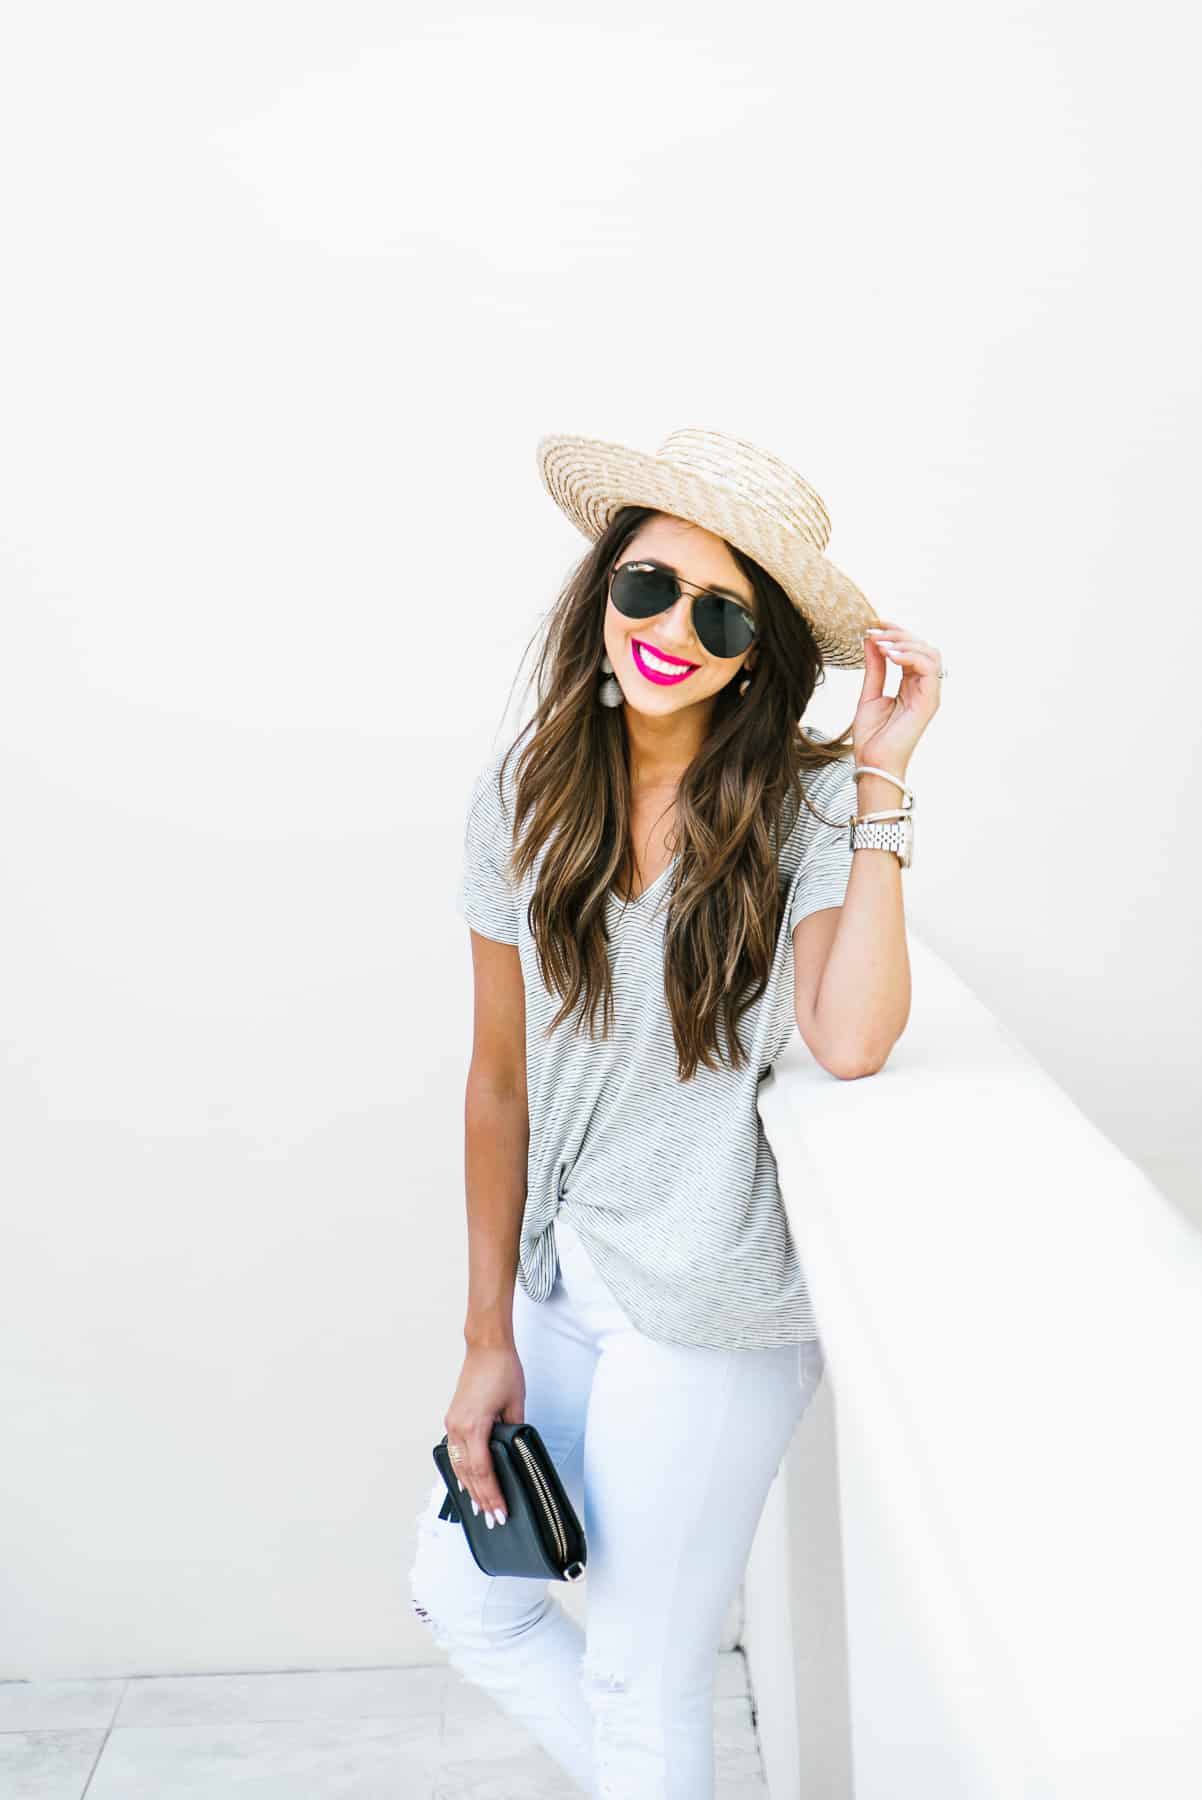 Dress Up Buttercup, Dede Raad, Houston Blogger, Fashion Blogger, Stripe tee, basic tee, white jeans, how to accessorize a basic tee